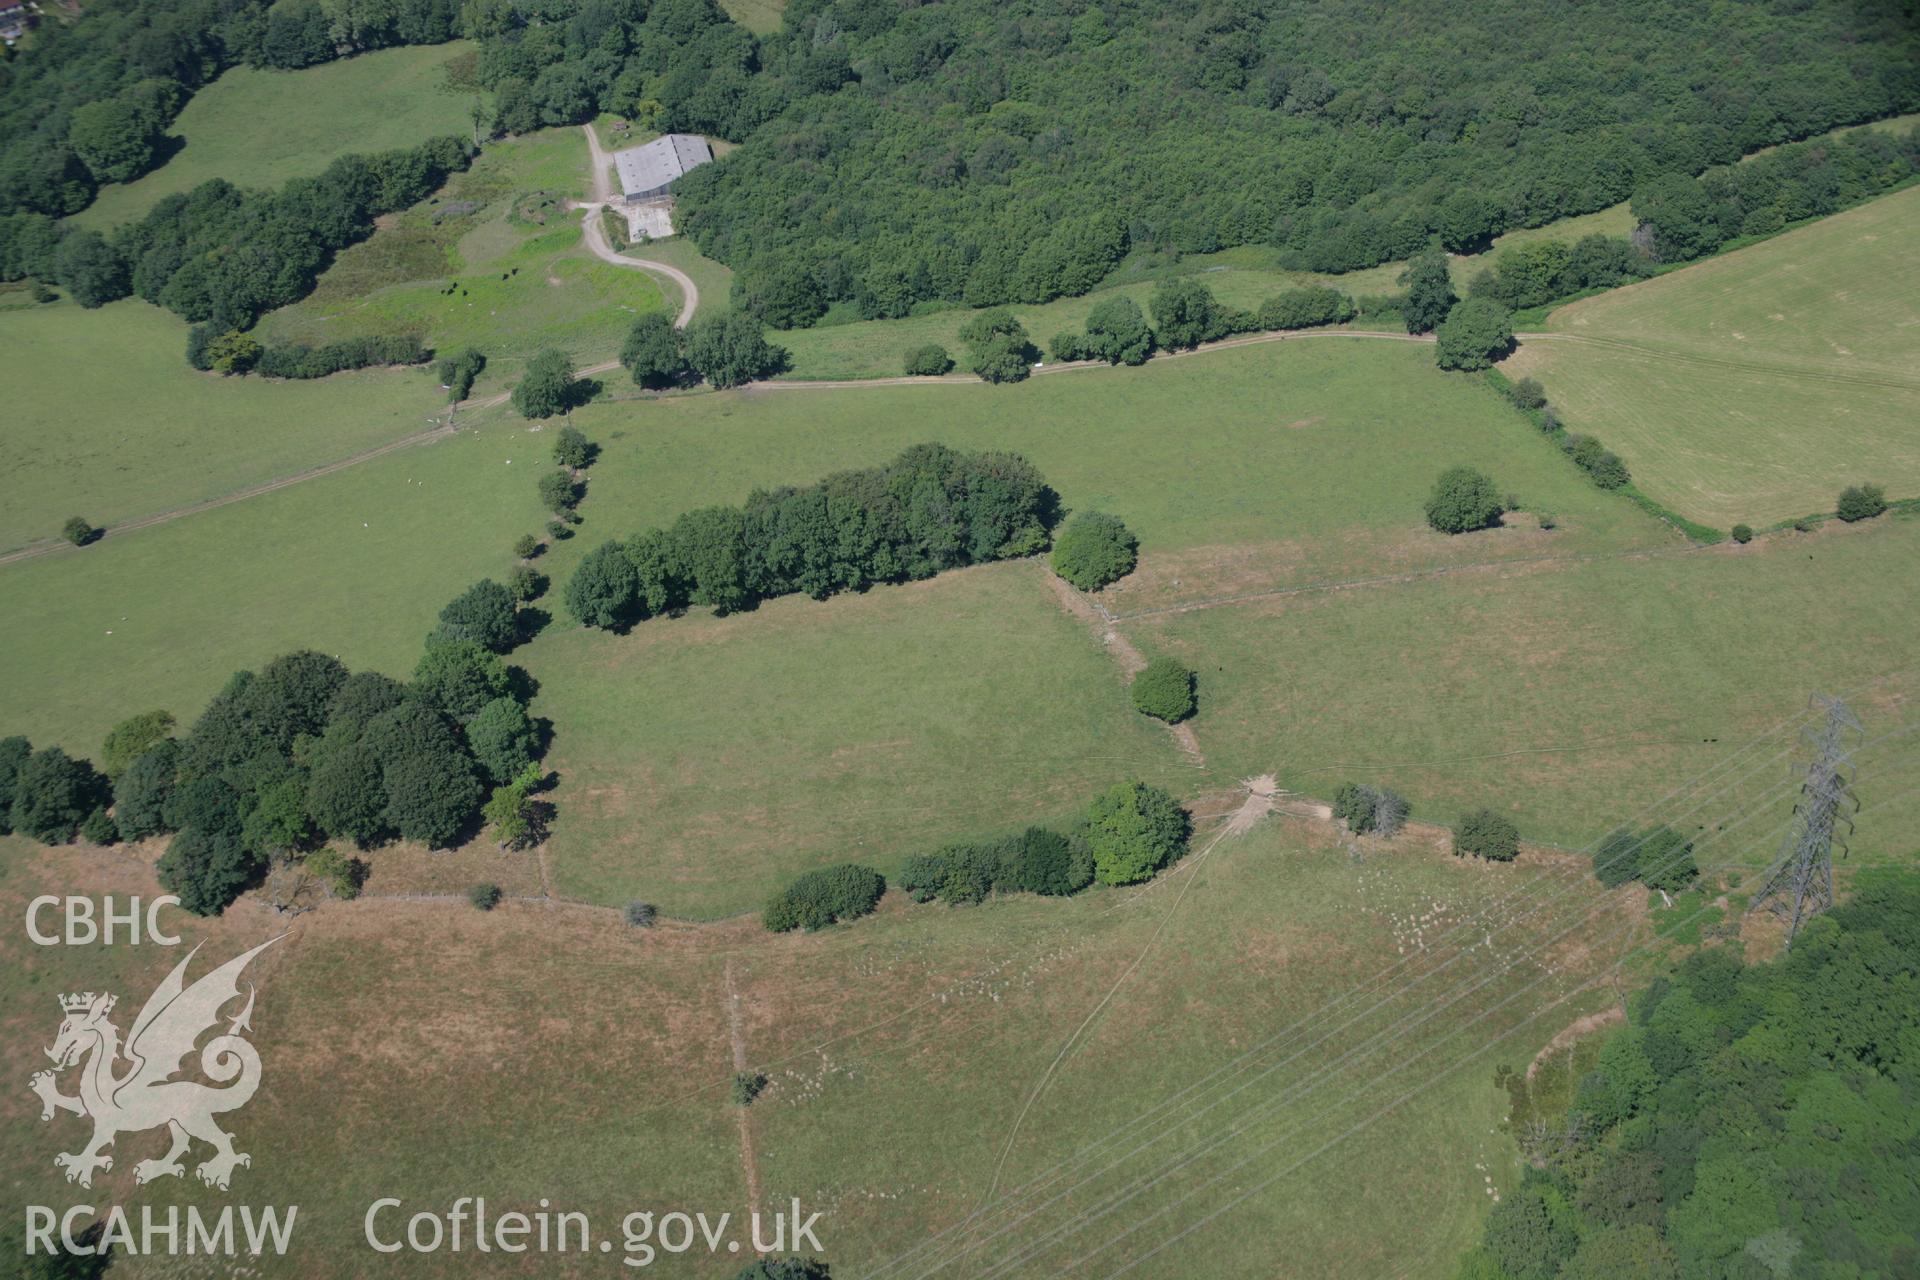 RCAHMW colour oblique aerial photograph of Coed Hendre-Sguthan Hillfort. Taken on 24 July 2006 by Toby Driver.